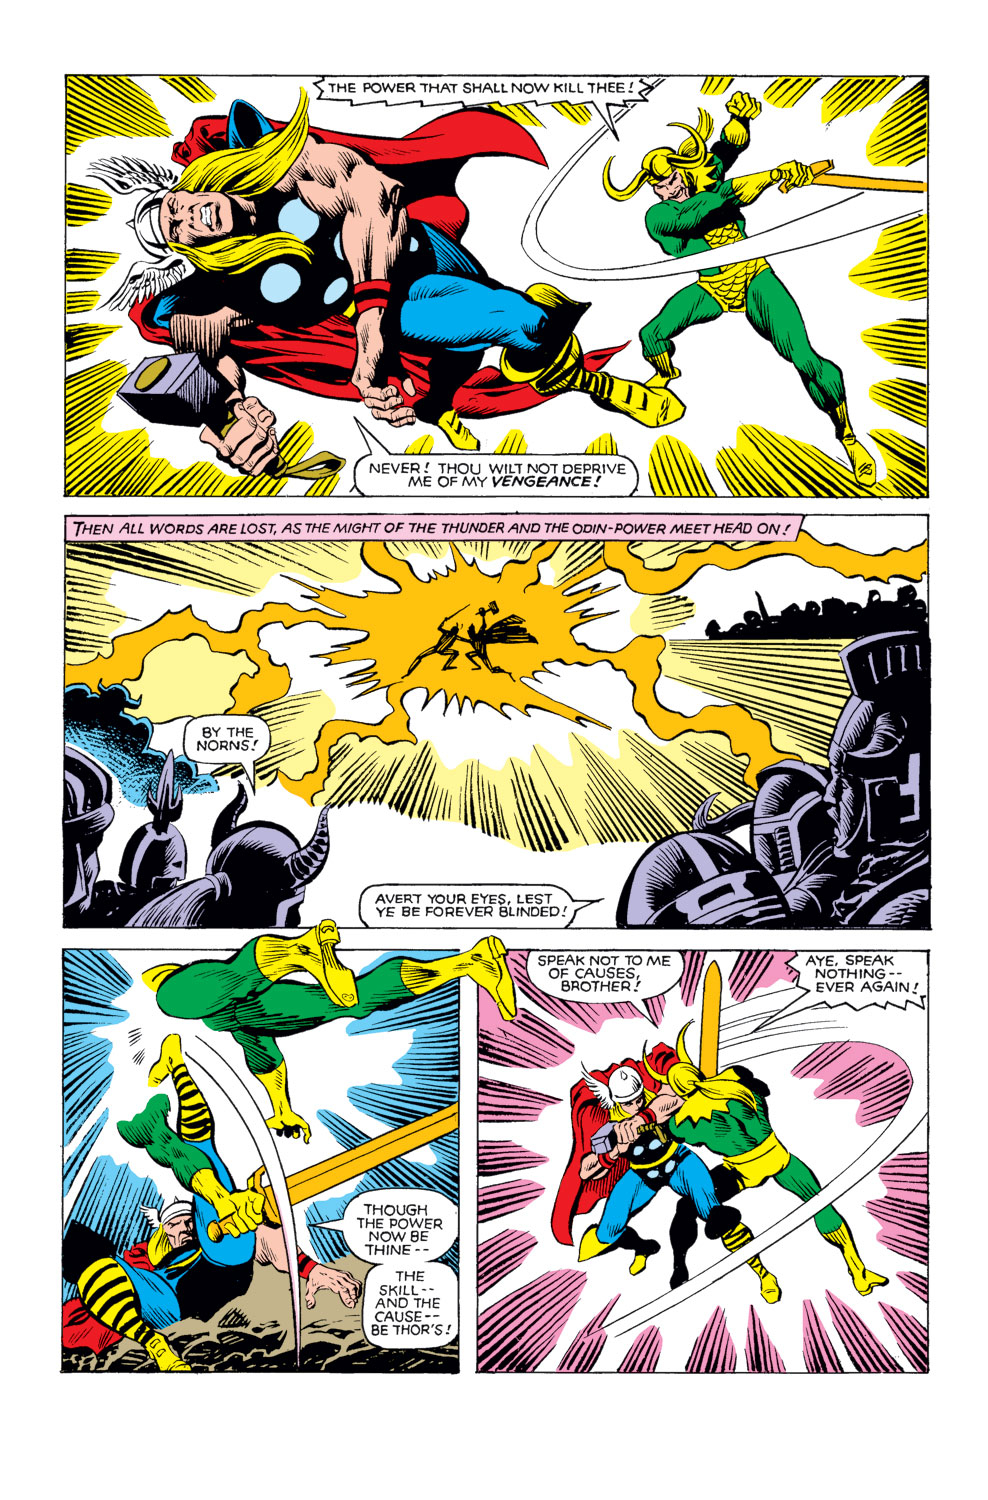 What If? (1977) issue 25 - Thor and the Avengers battled the gods - Page 26